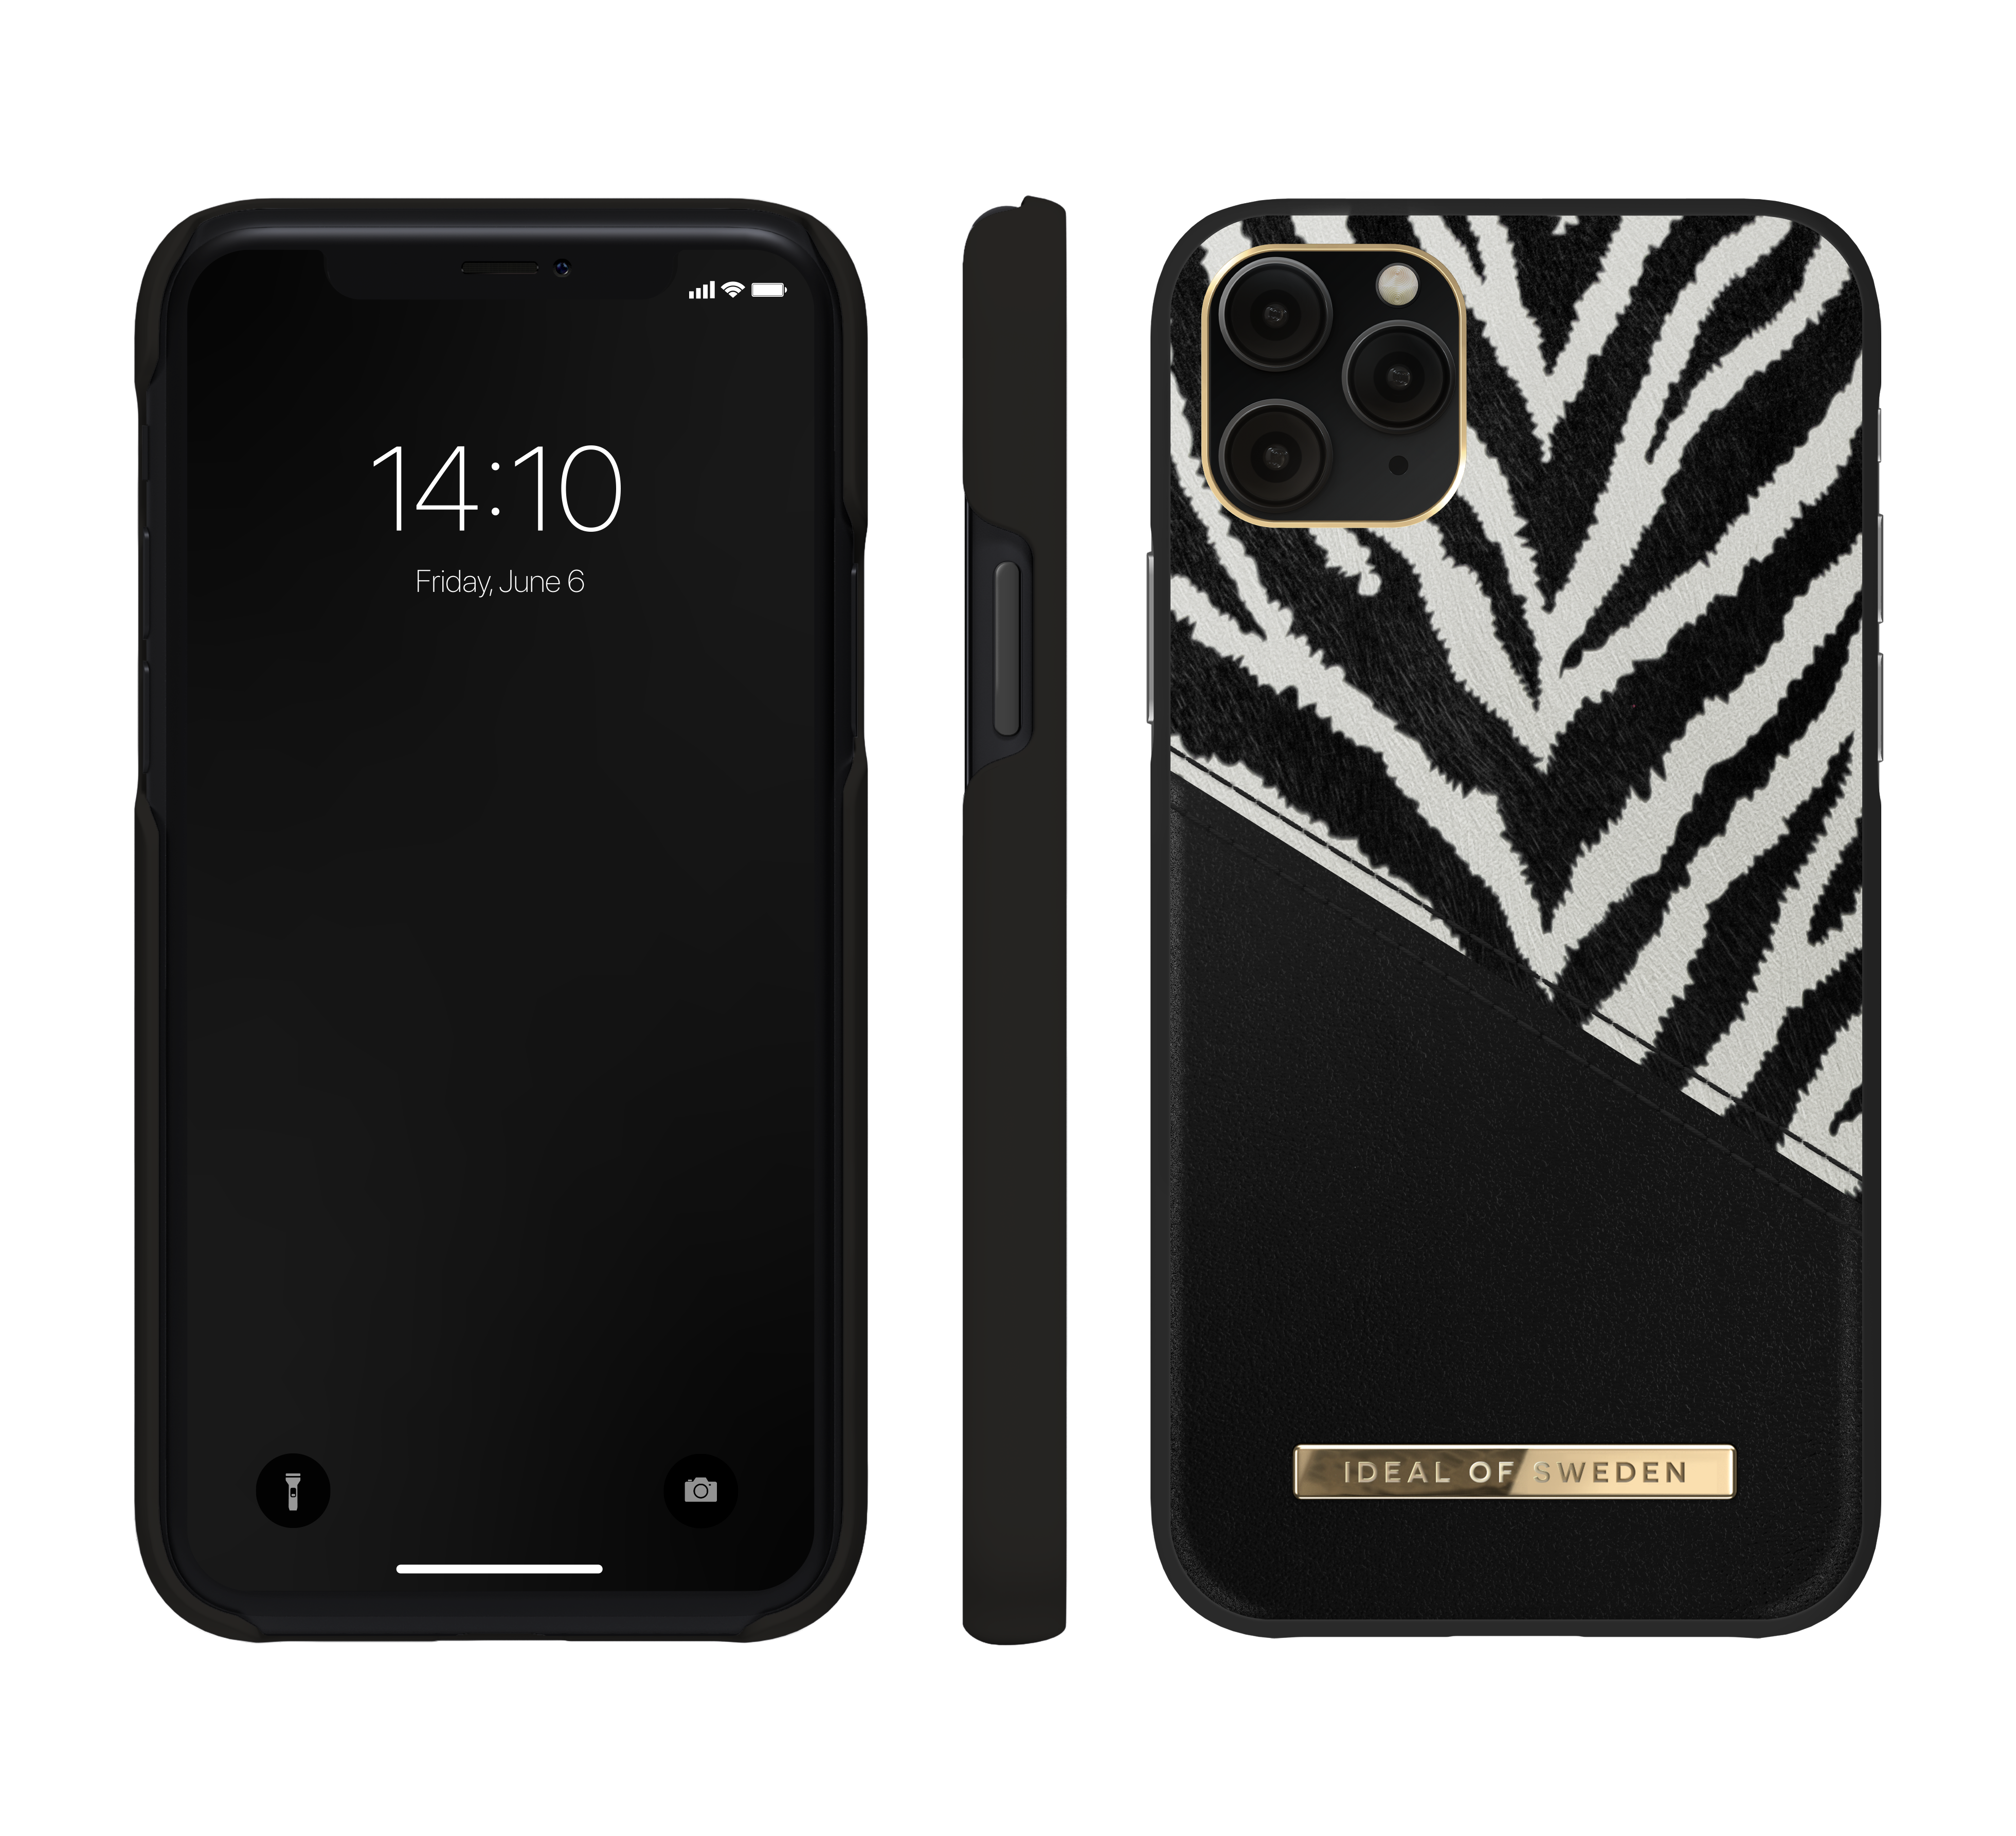 Eclipse OF iPhone IDACAW20-1958-247, iPhone X, Backcover, 11 Apple, Zebra XS, IDEAL iPhone SWEDEN Pro,